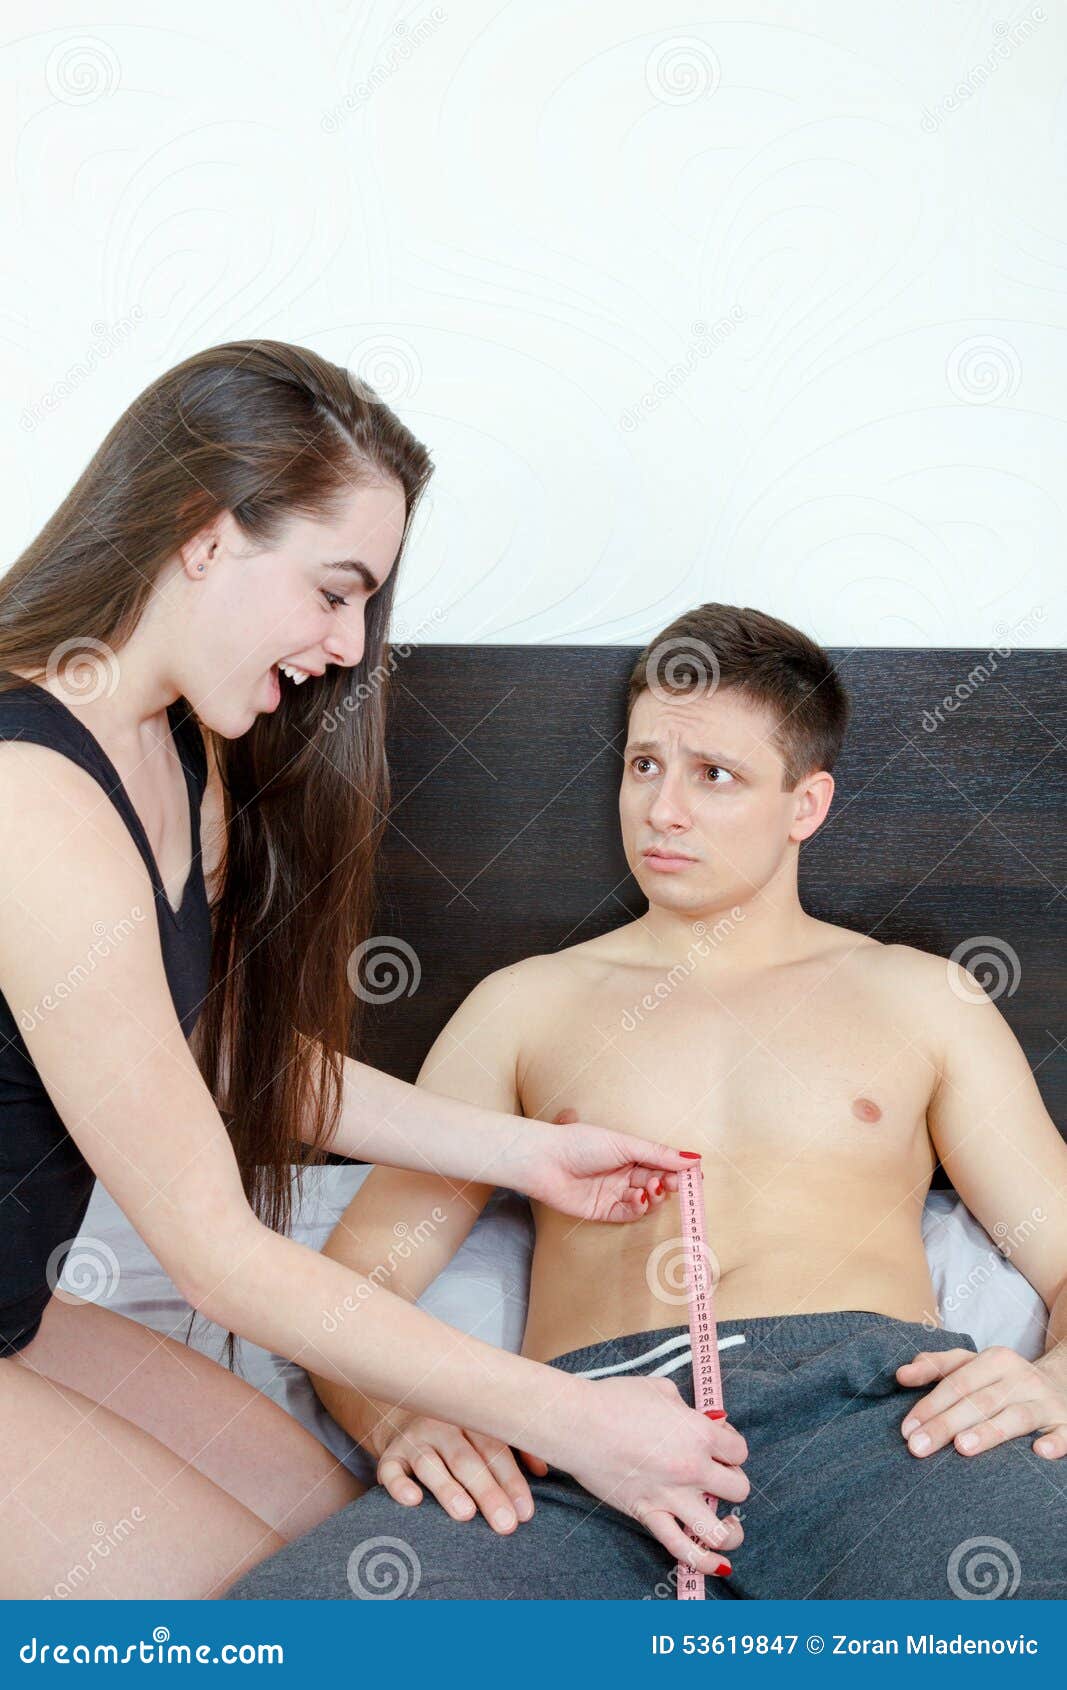 Worried Man Looking at Woman Measuring Size of His Penis Stock Image